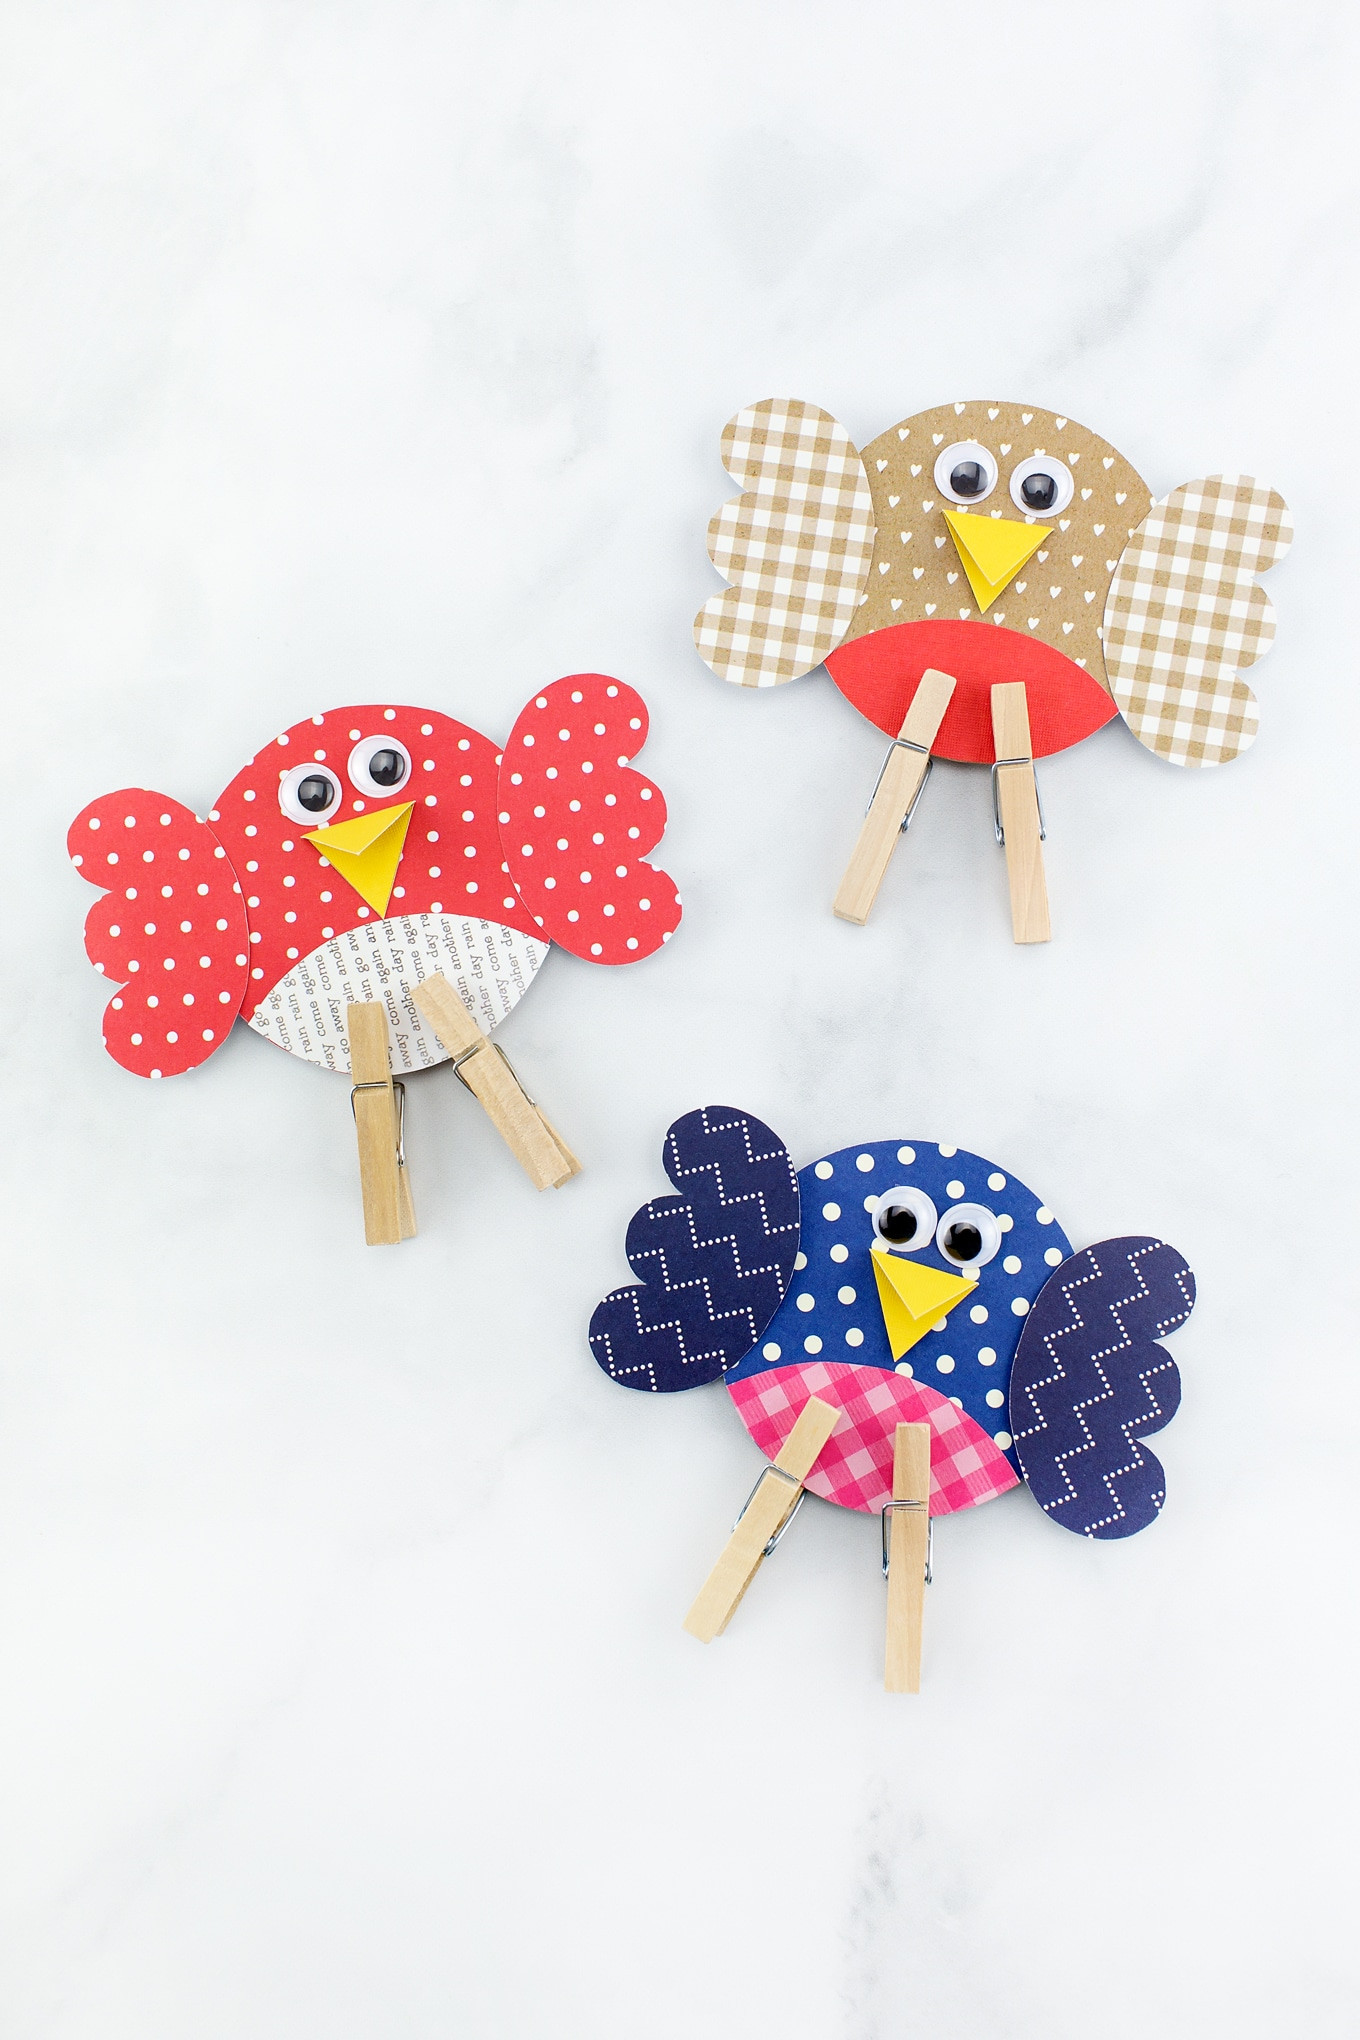 Best ideas about Fun Paper Crafts
. Save or Pin How to Make an Easy and Fun Paper Bird Craft Now.